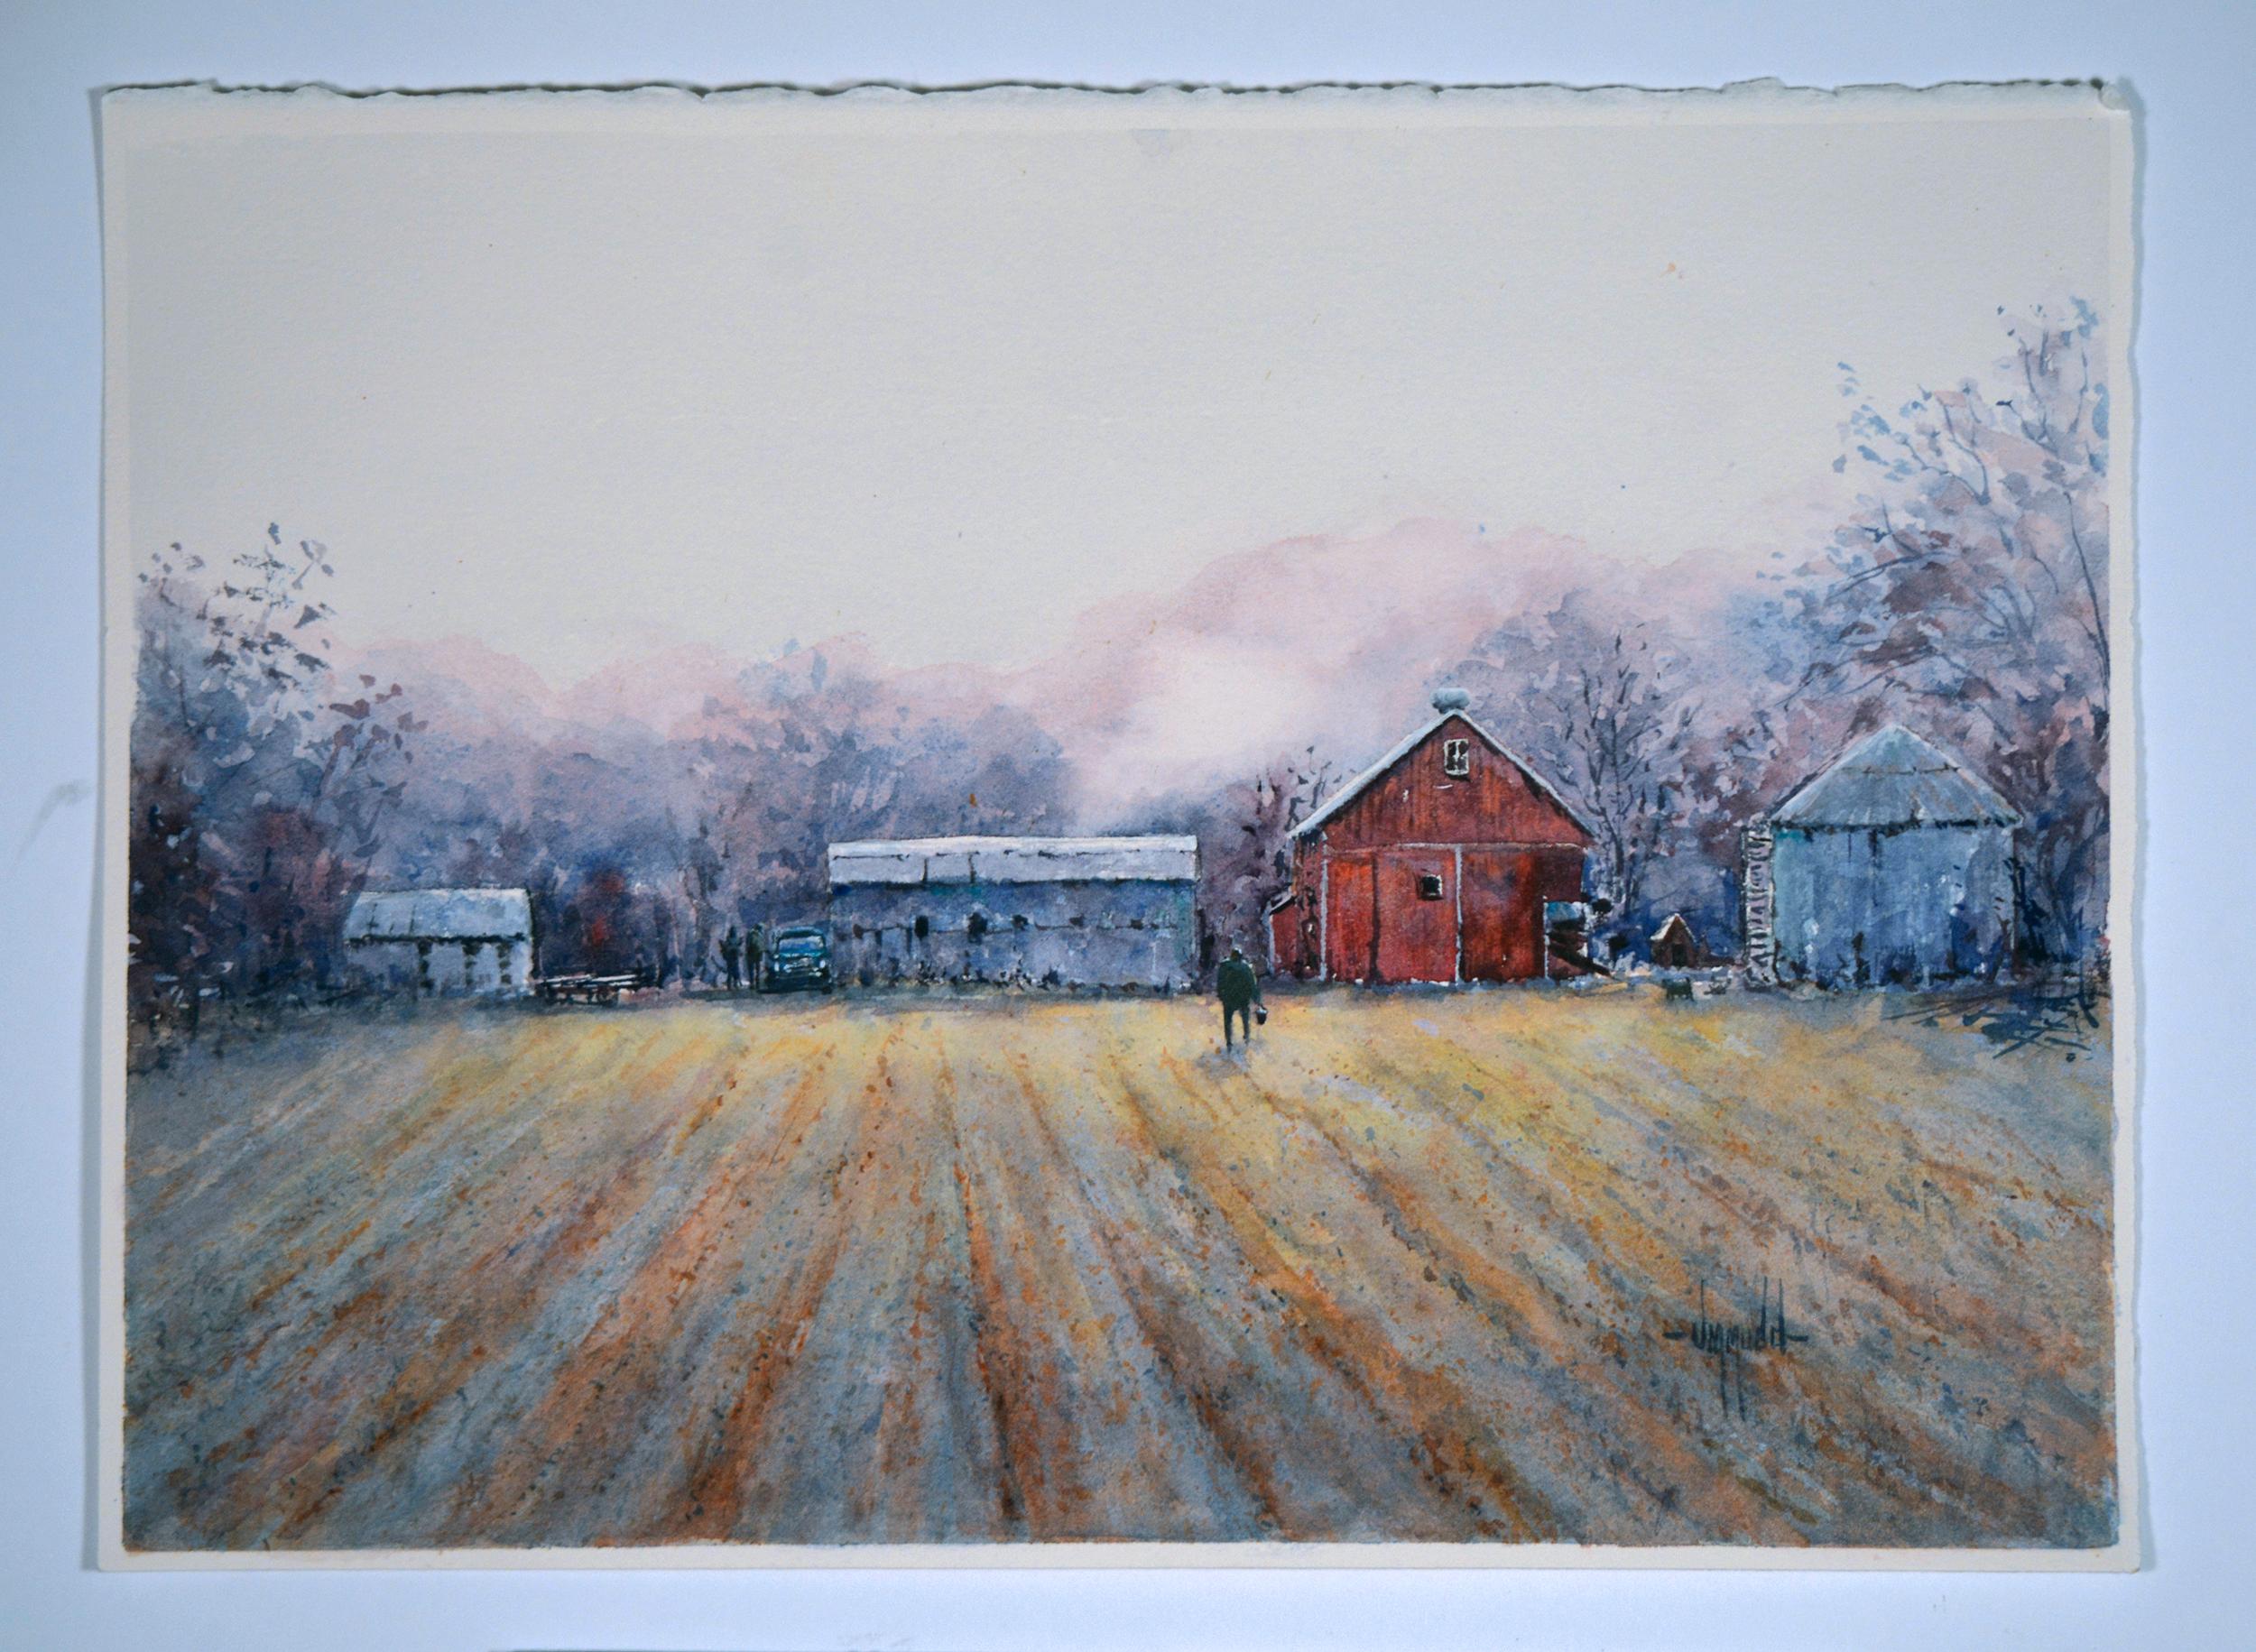 <p>Artist Comments<br />This painting depicting an early morning farm scene has muted colors throughout. Back-lighting accents the buildings and figure walking in the foreground. This painting is produced with the finest professional watercolor